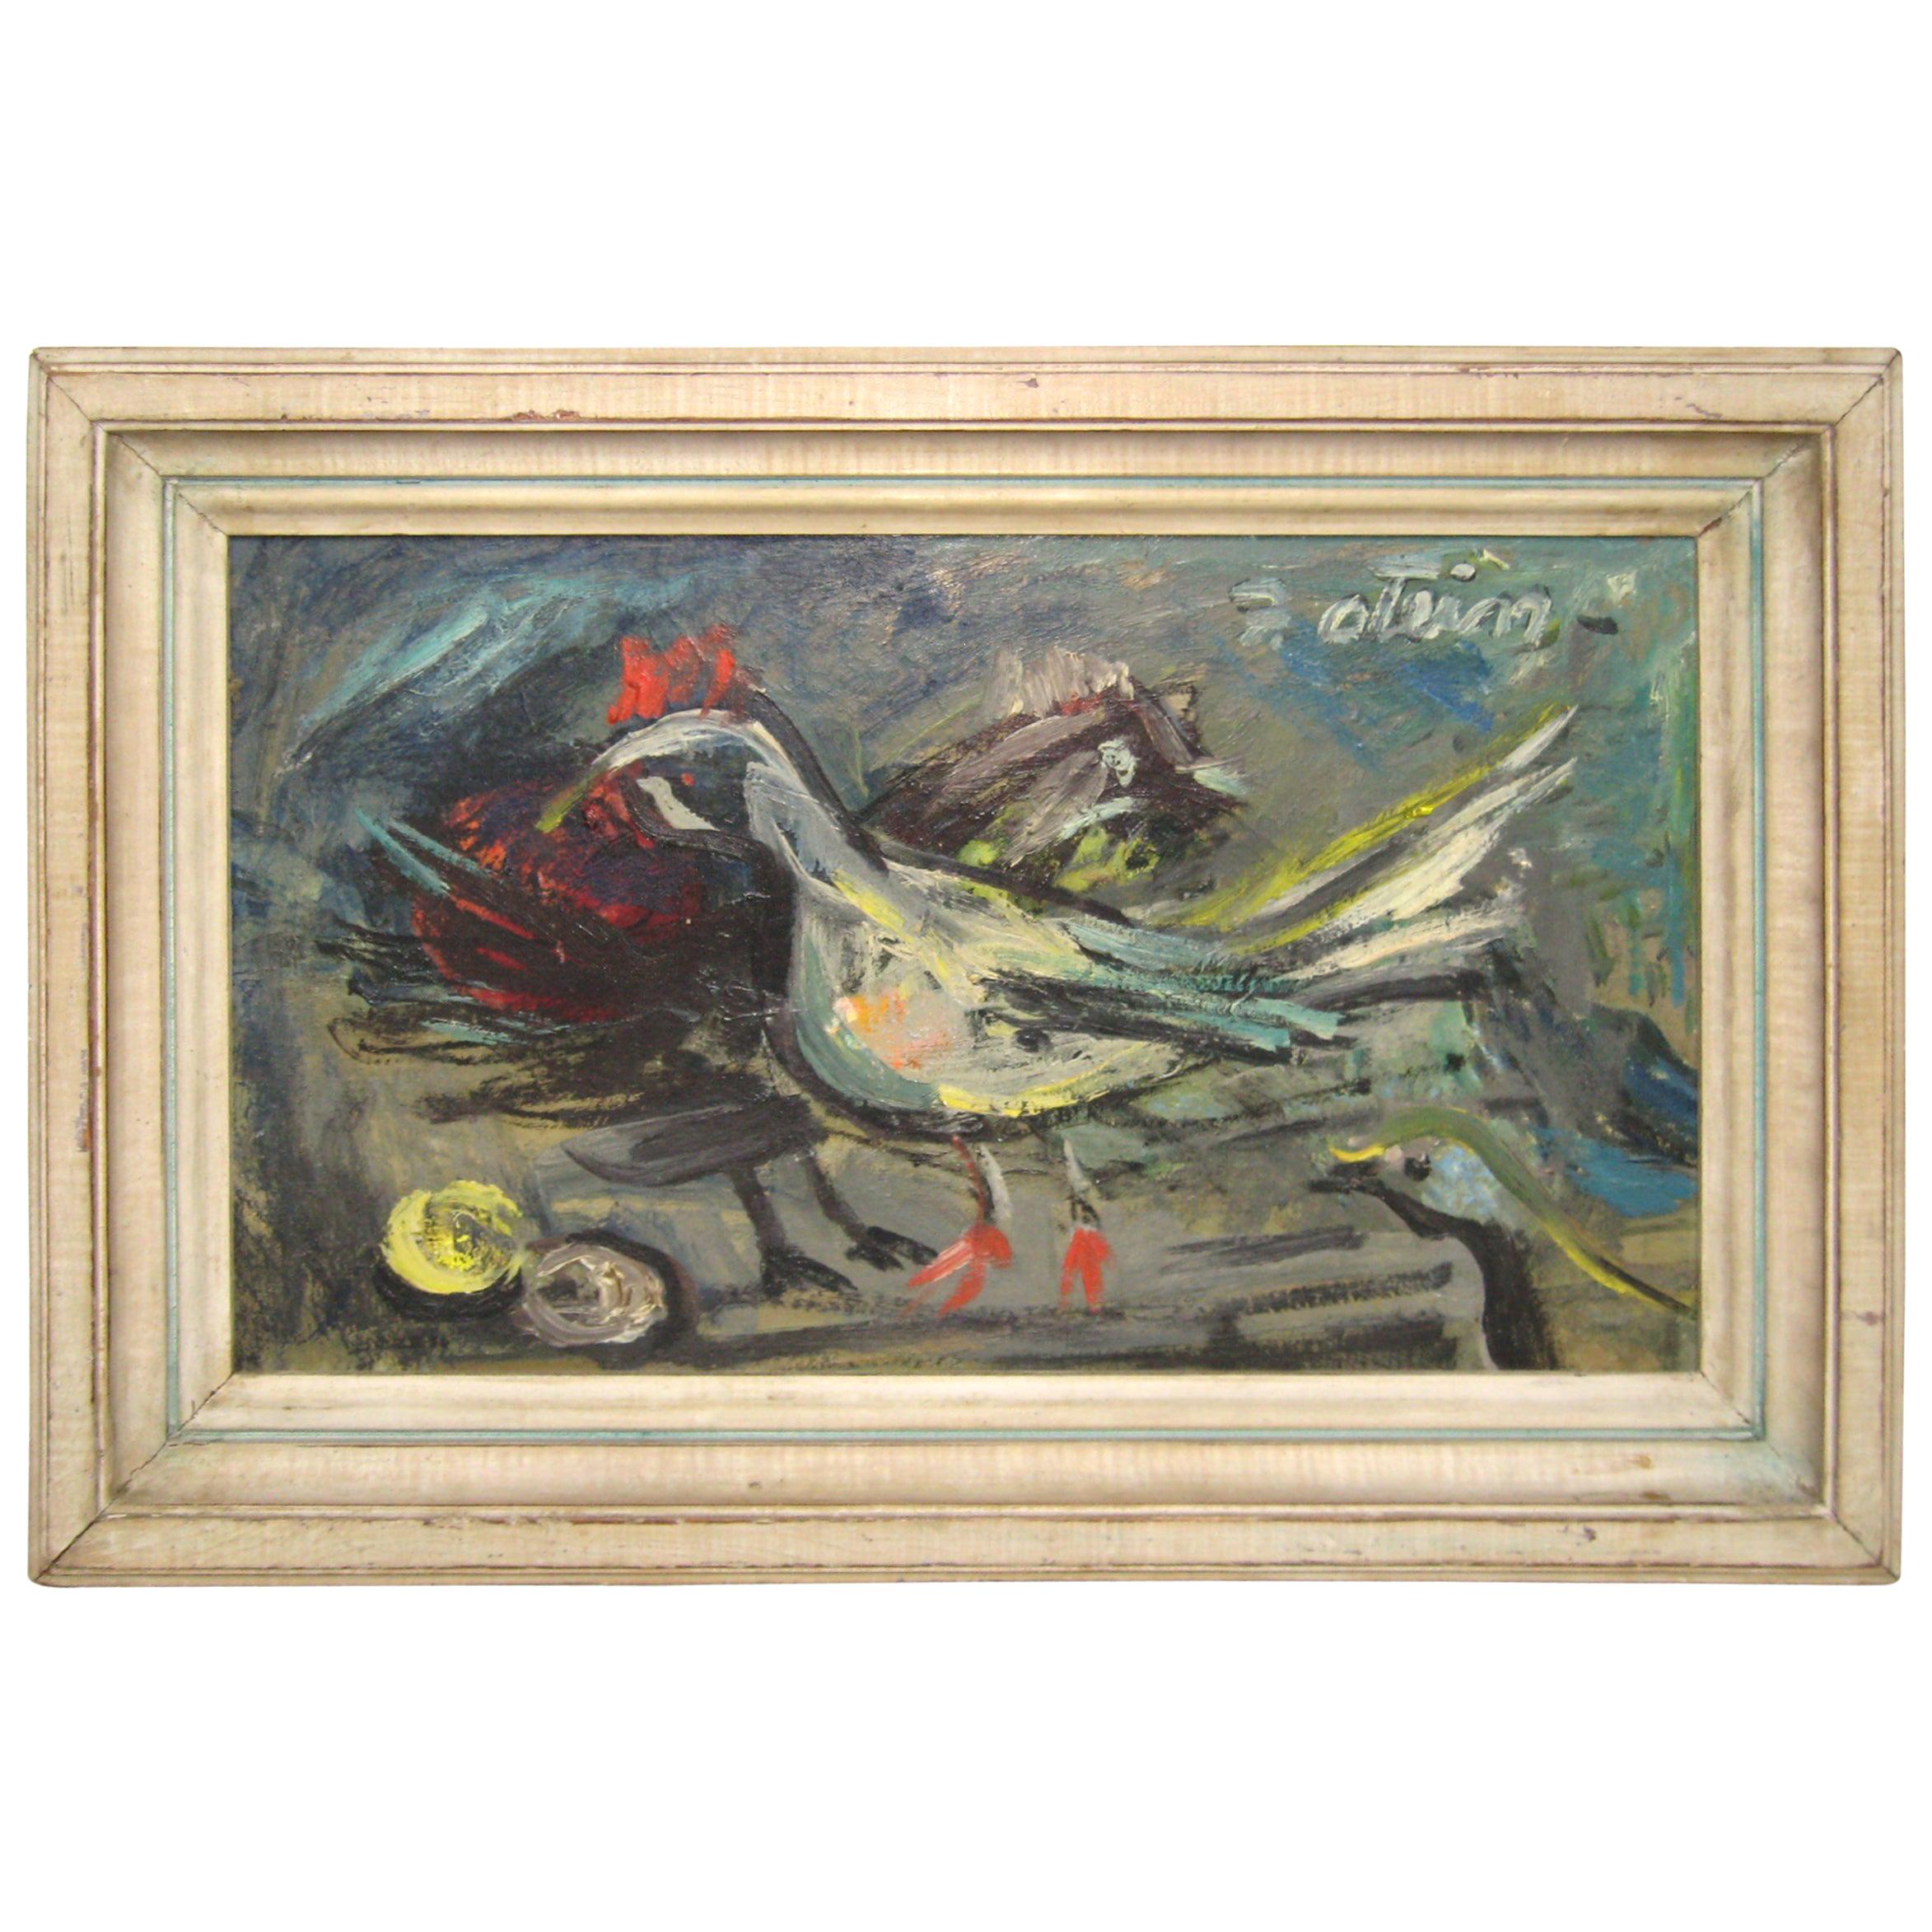  Impressionism Woodstock NY Artist "Chicken and Eggs" Oil on Canvas